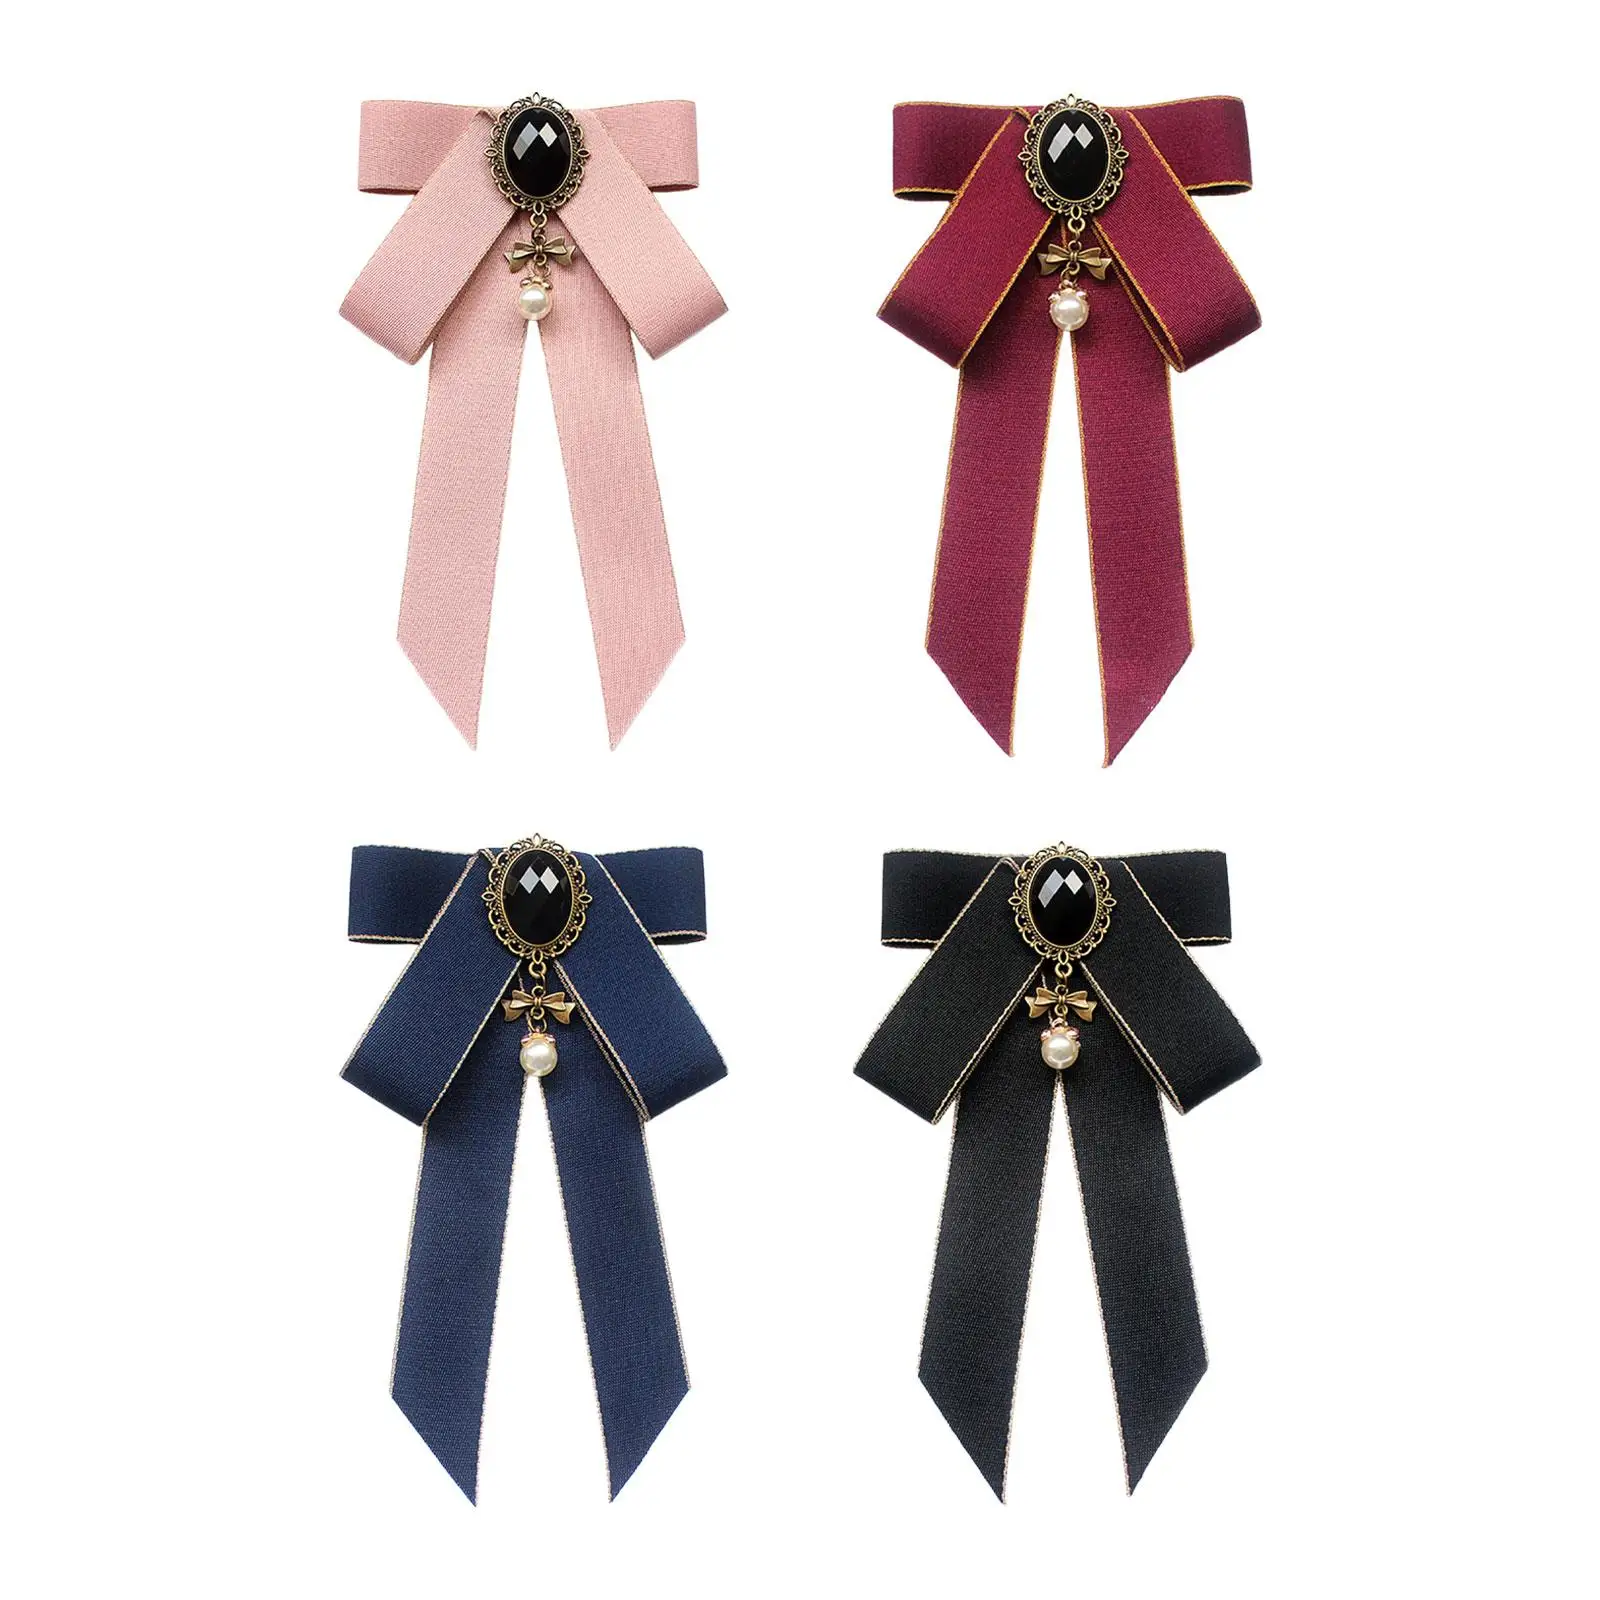 

Ribbon Bow Brooch Pre Tied Bowknot Collar Pin Ladies Elegant Neck Tie Necktie for Shirt Suit Uniform Blouse Costume Accessories